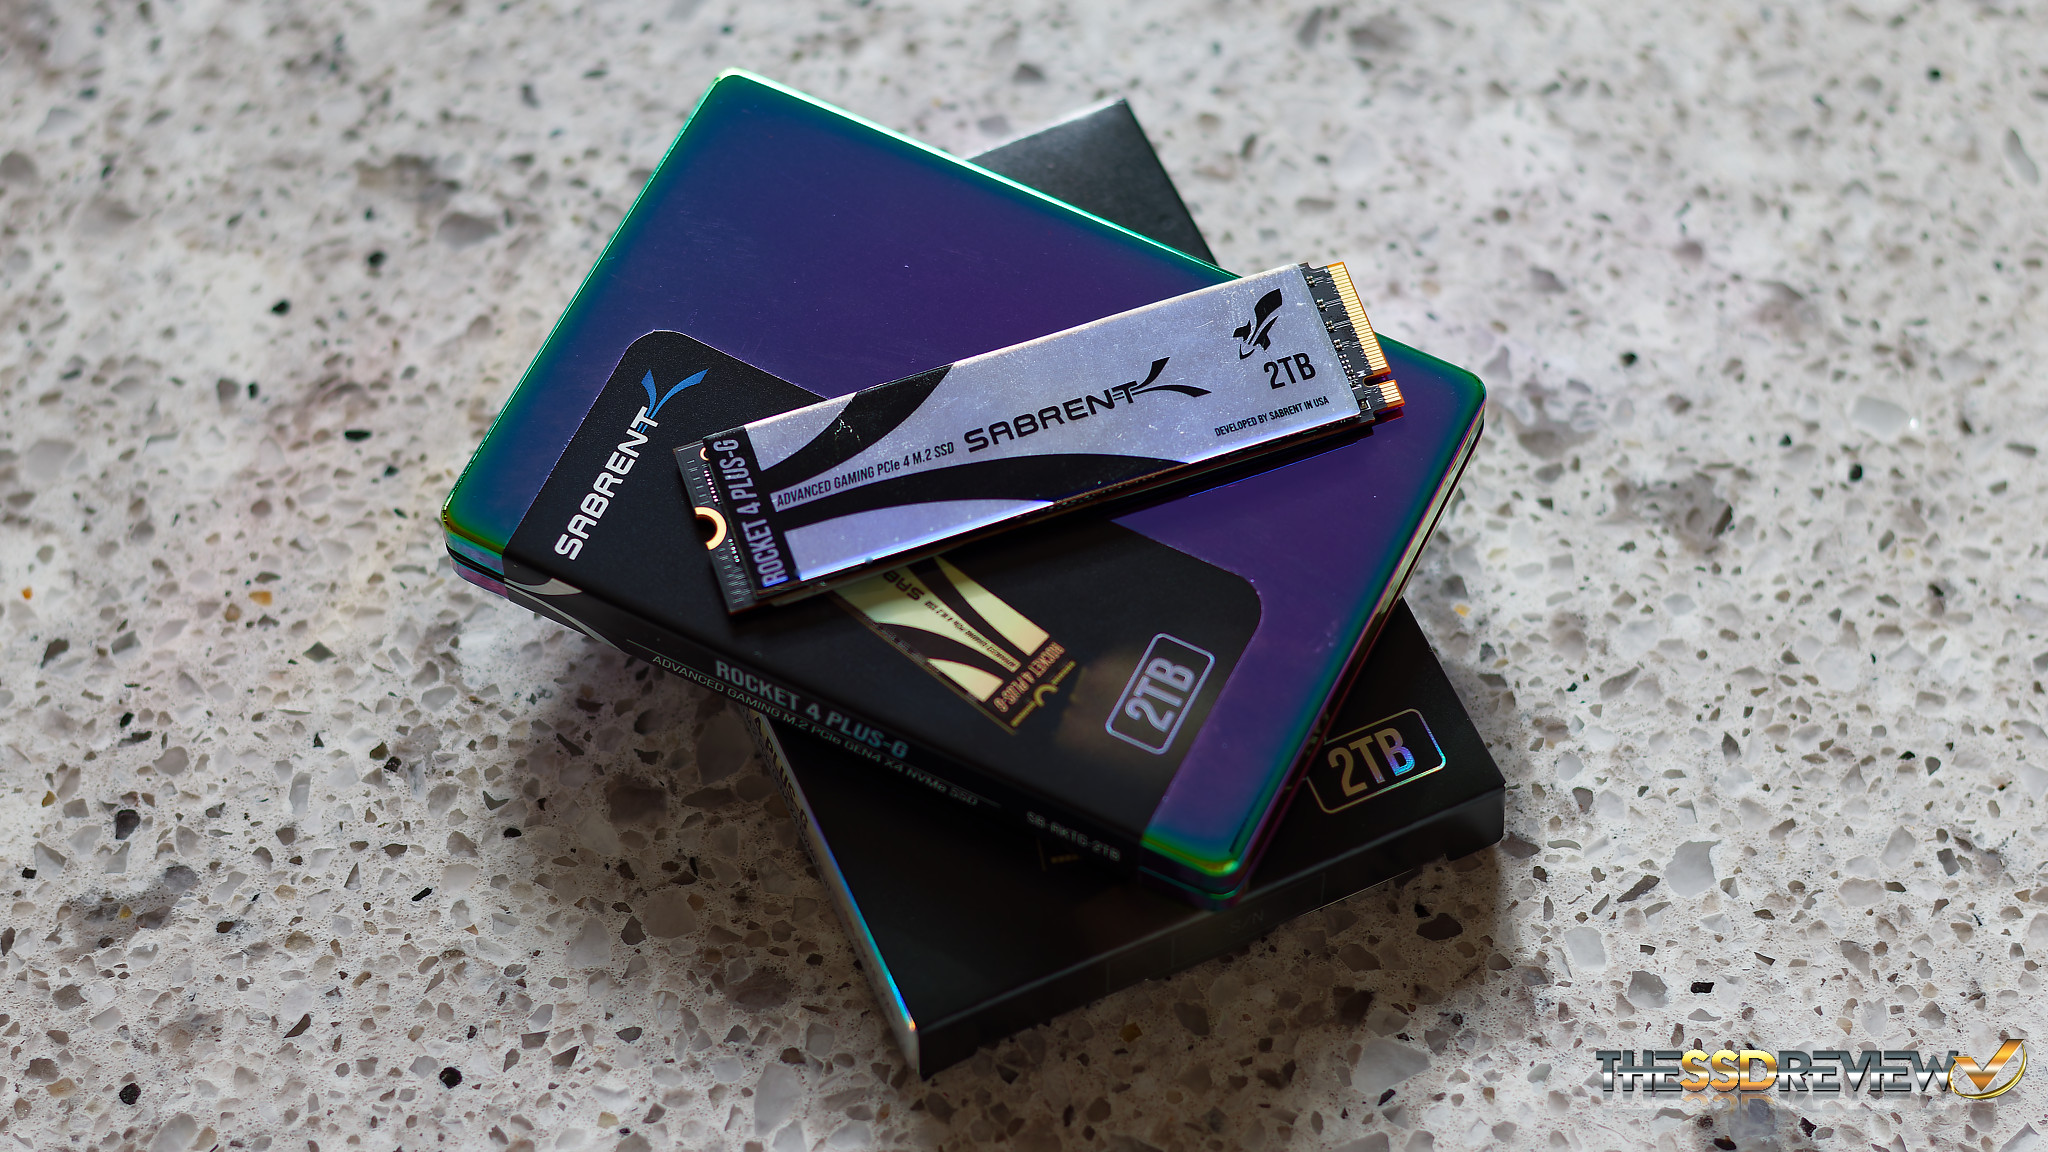 Sabrent Rocket 4 Plus SSD review: Goes like a rocket, and costs